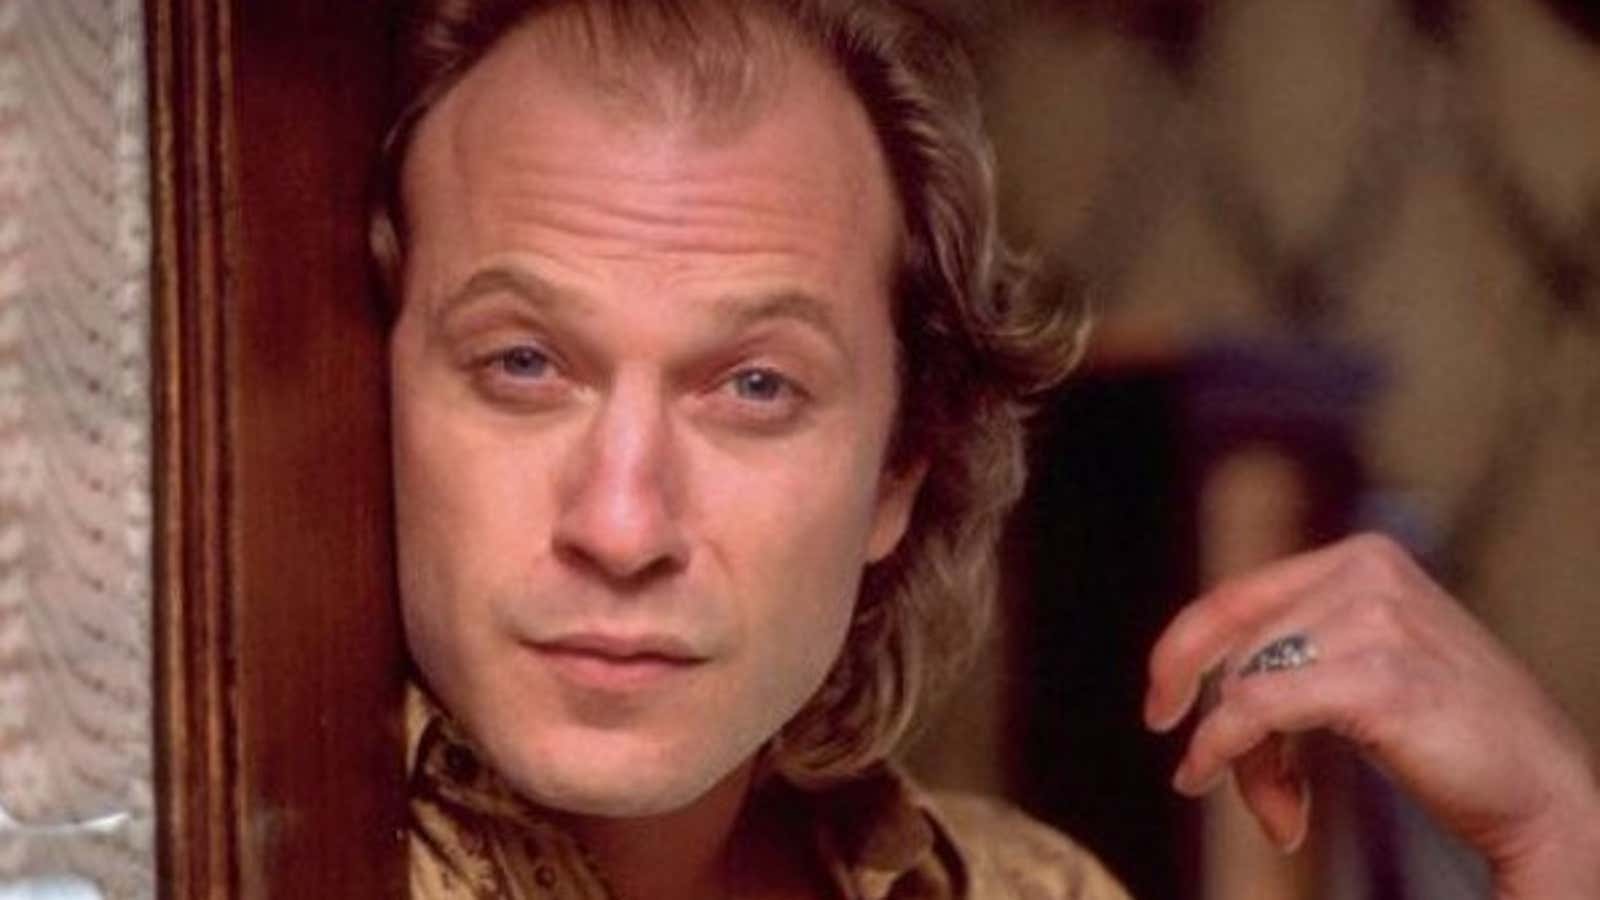 30 years in,<i> The Silence Of The Lambs</i>’ Jame Gumb still deserves better